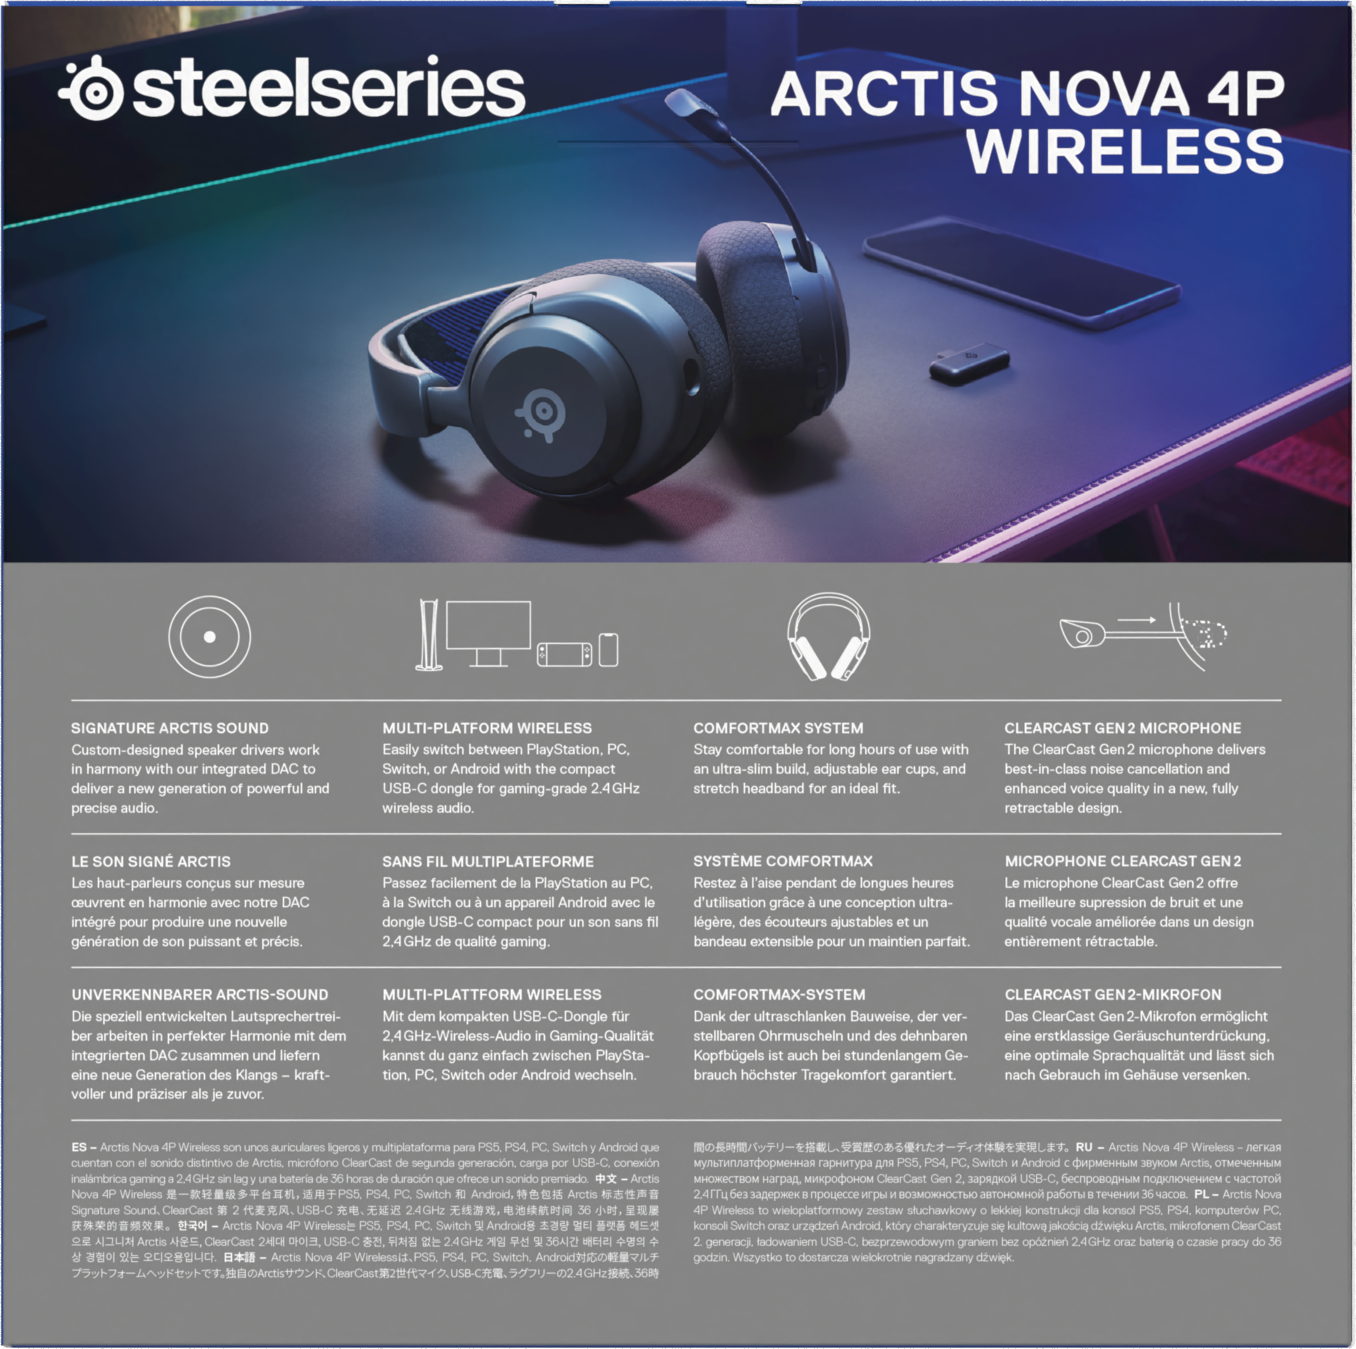 Headset PC, PlayStation GameStop 2, Meta for | Quest Wireless Arctis Switch, Gaming SteelSeries 4P Nova